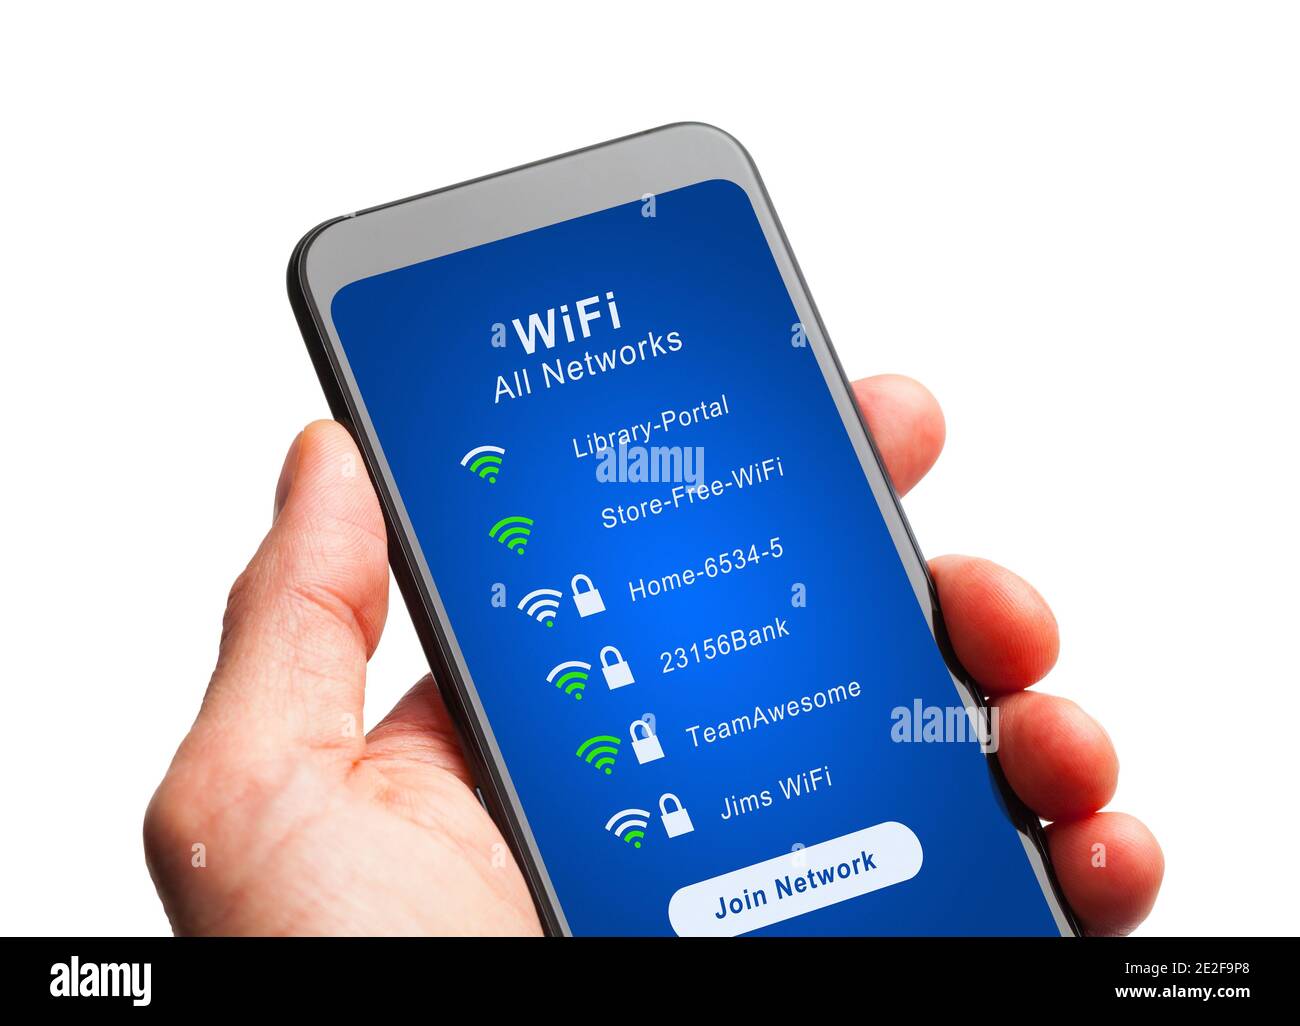 Hand Holding Smart Phone with Wifi Networks to Join. Stock Photo